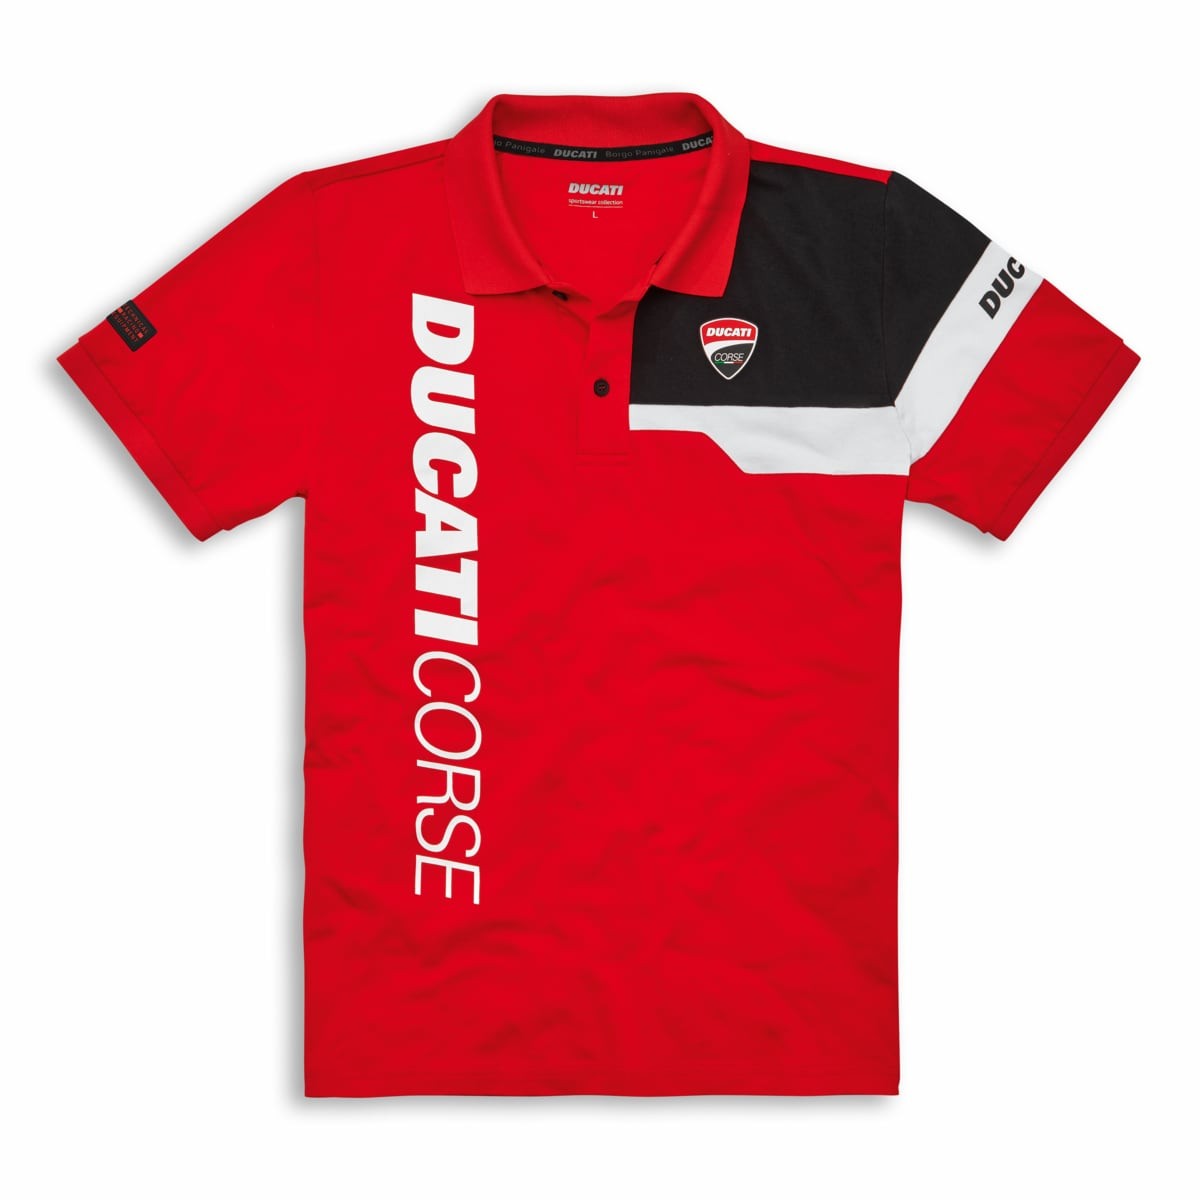 DC Track - Short-sleeved polo shirt